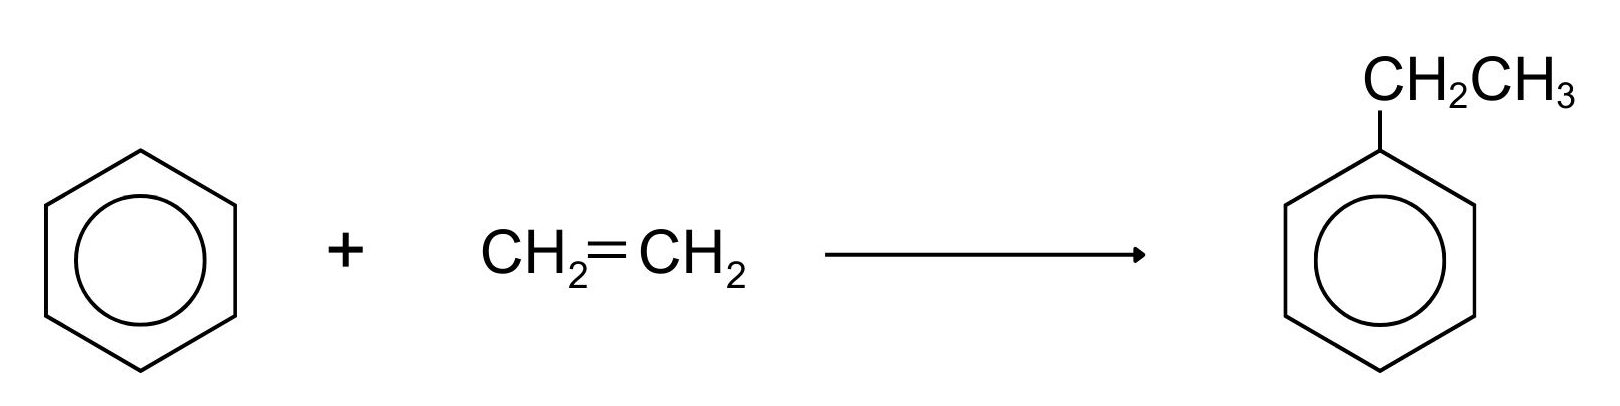 The structures involved in the reaction of benzene with ethene to produce ethylbenzene.